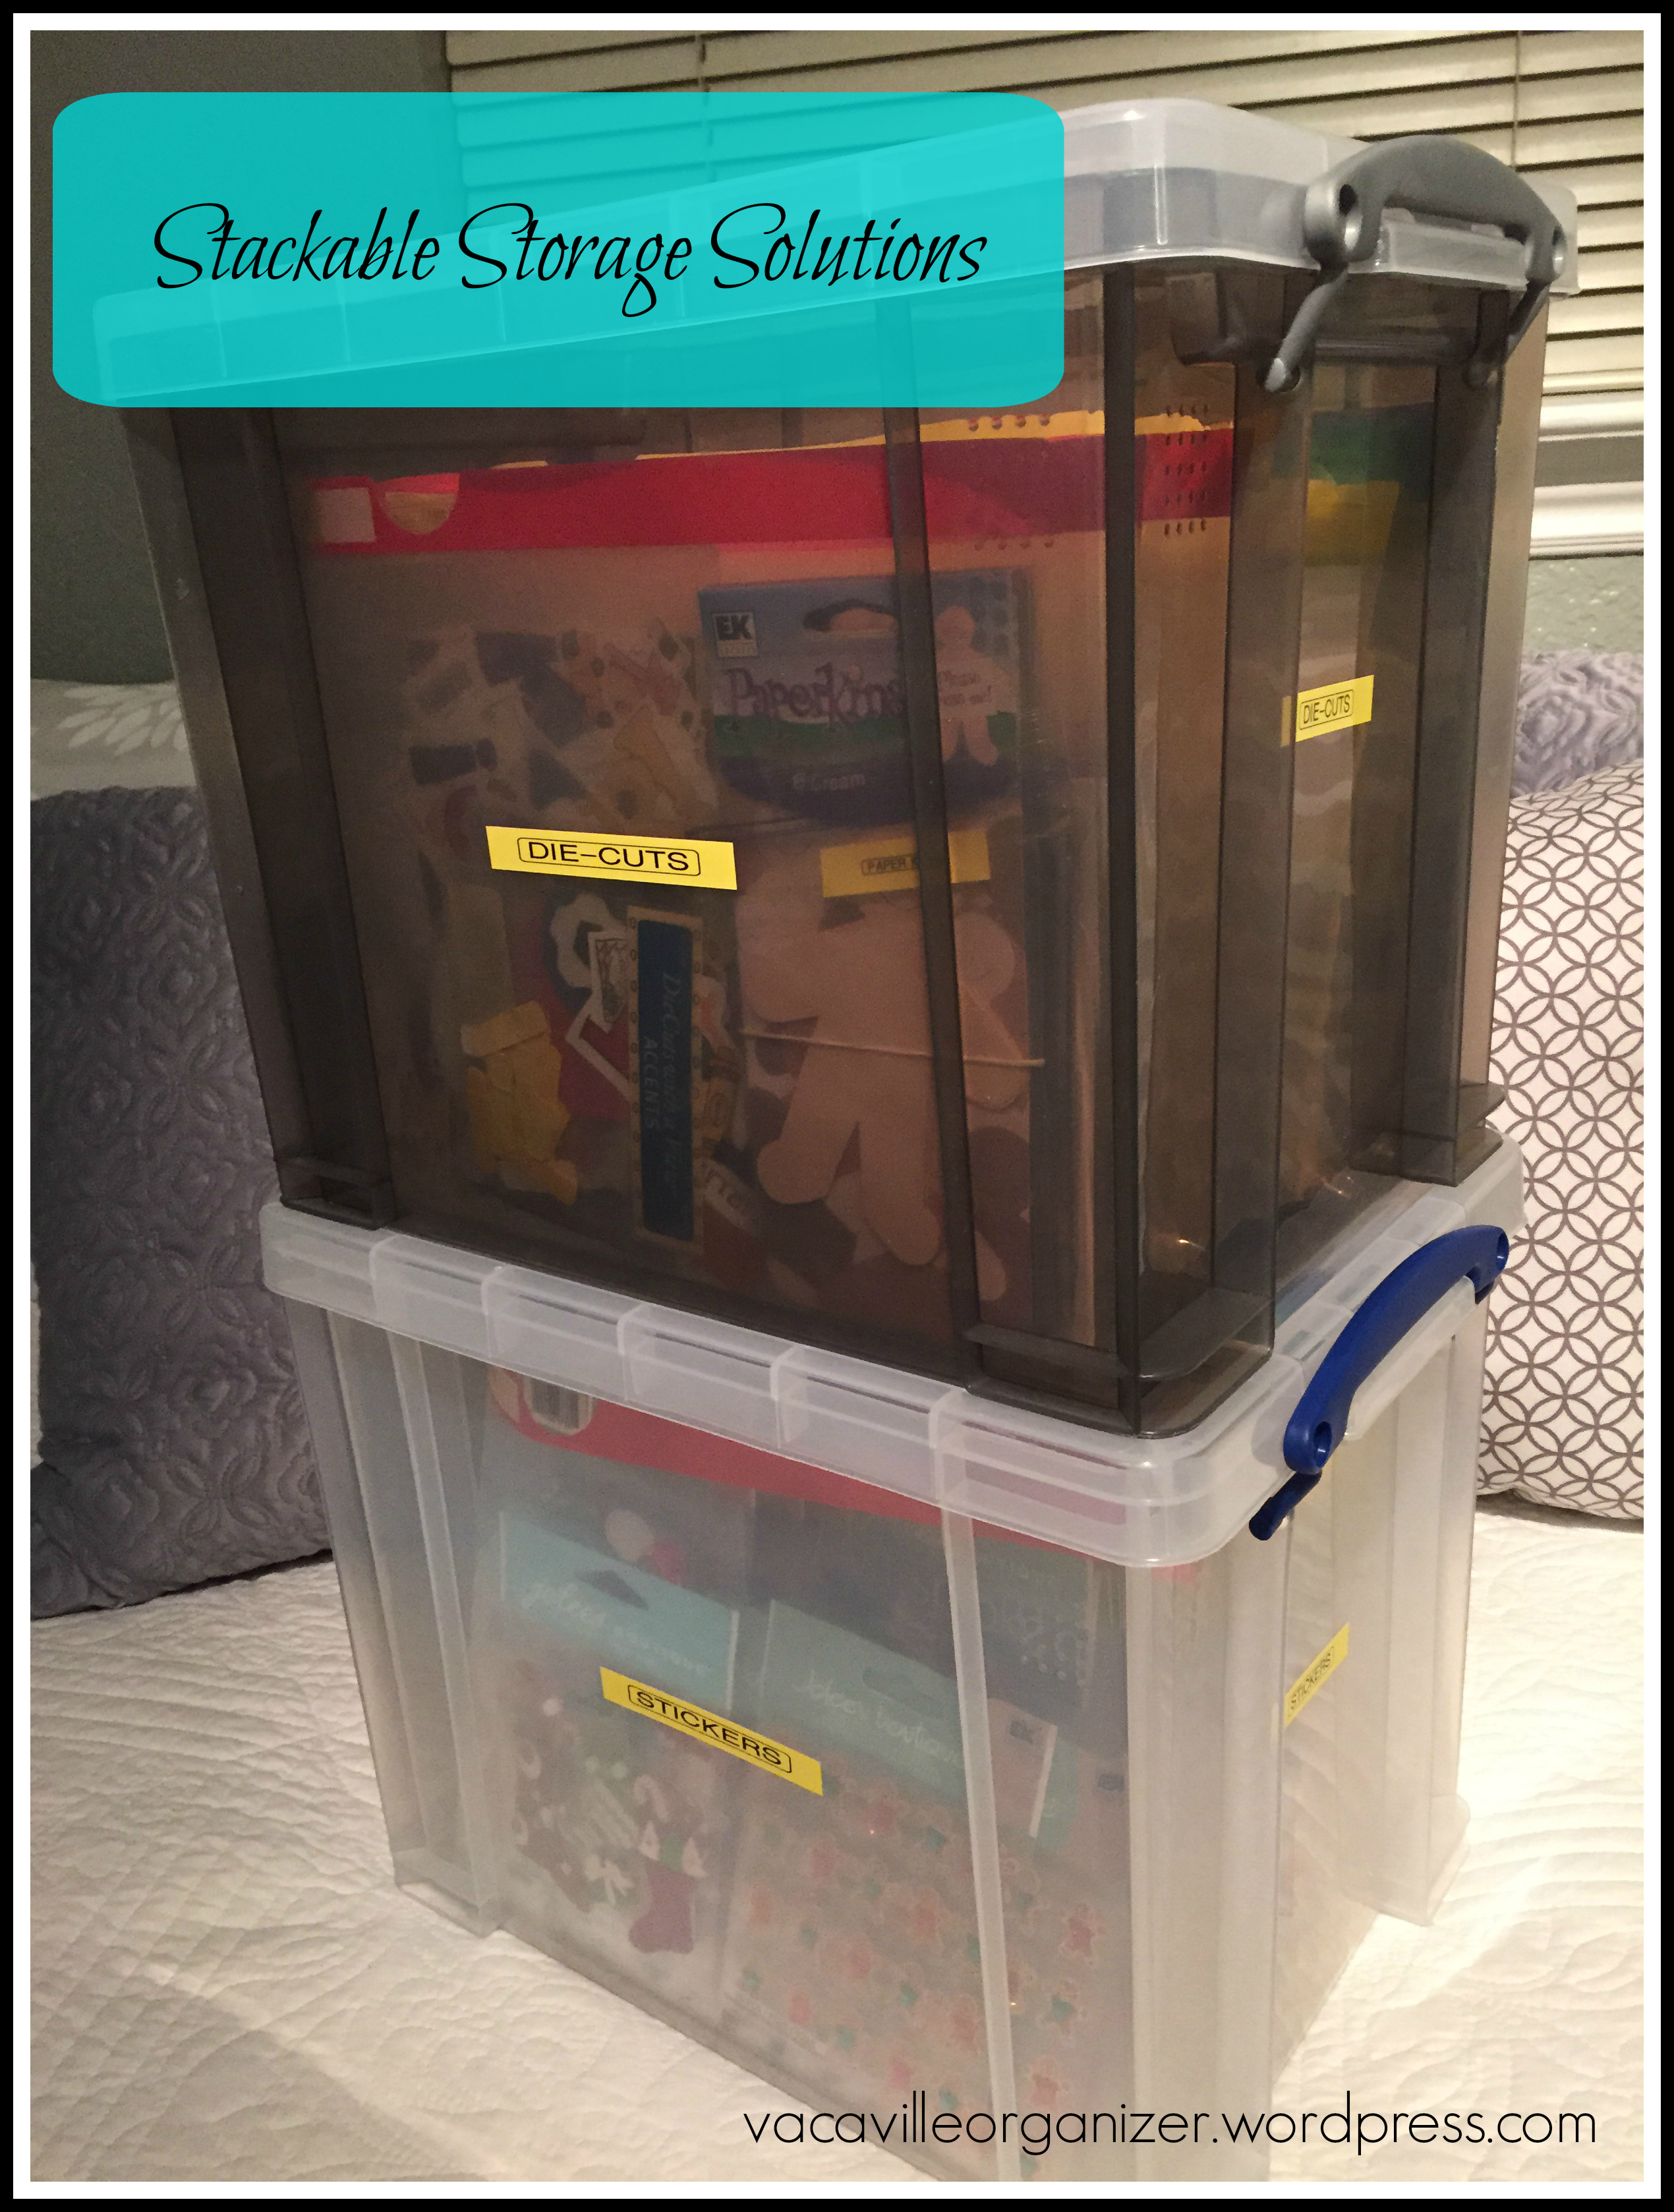 Crafter Organization: Die-cuts and Stickers – Vacaville Organizer